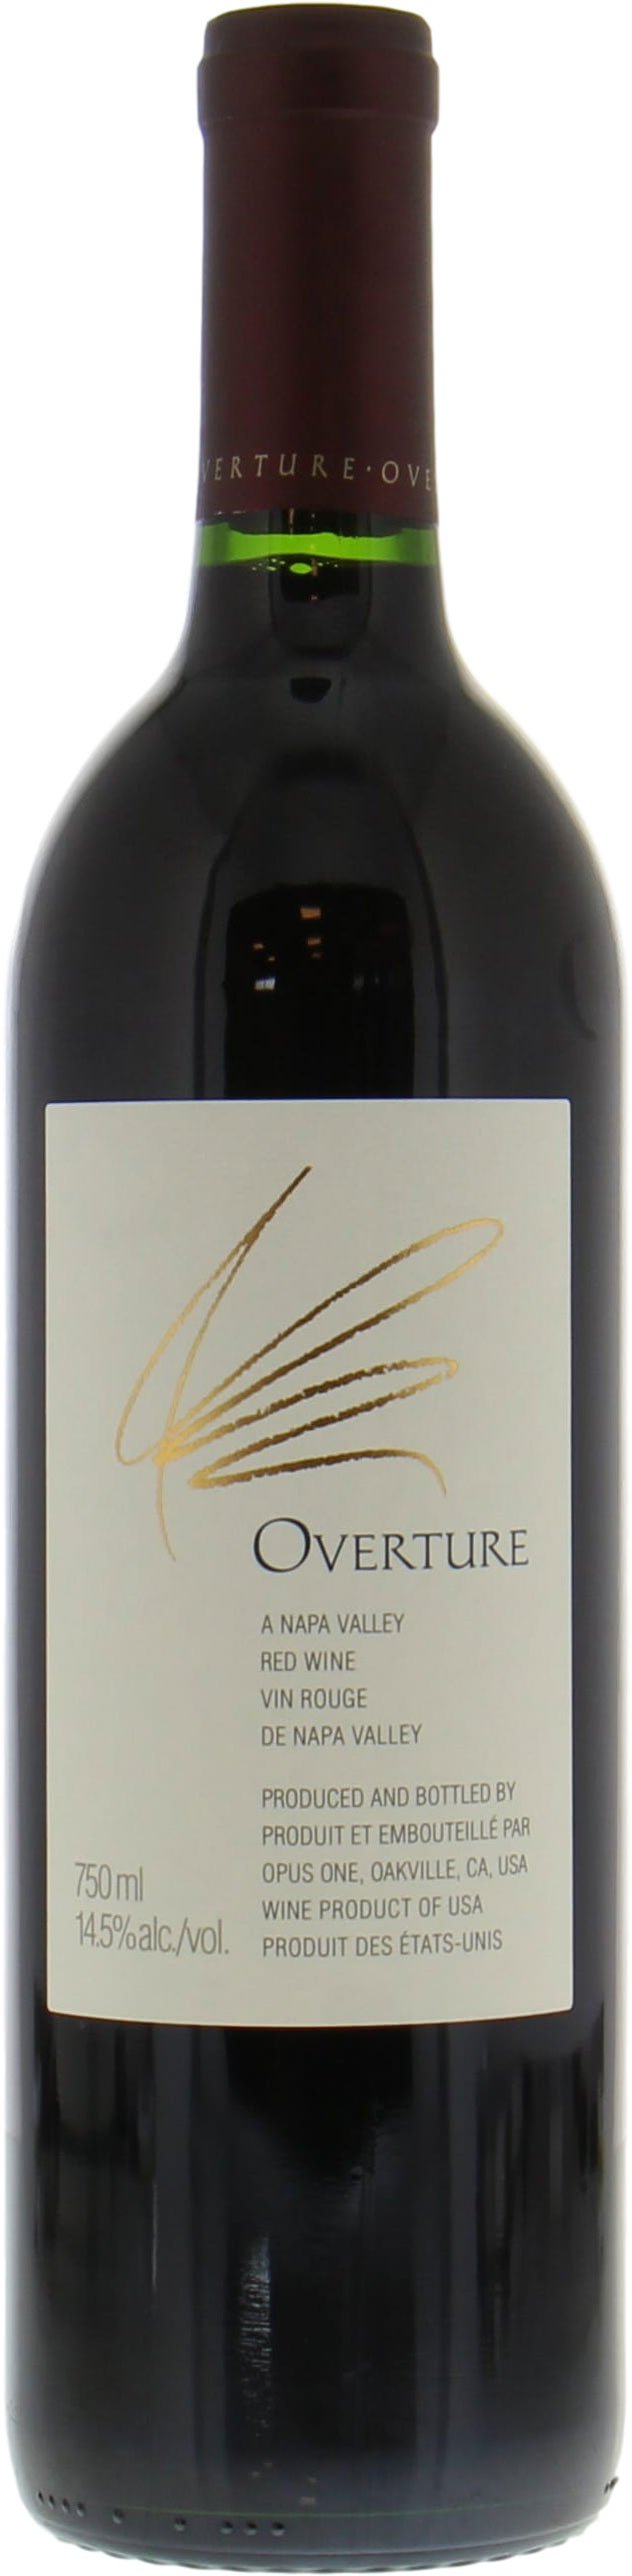 Opus One - Overture 2015 From Original Wooden Case